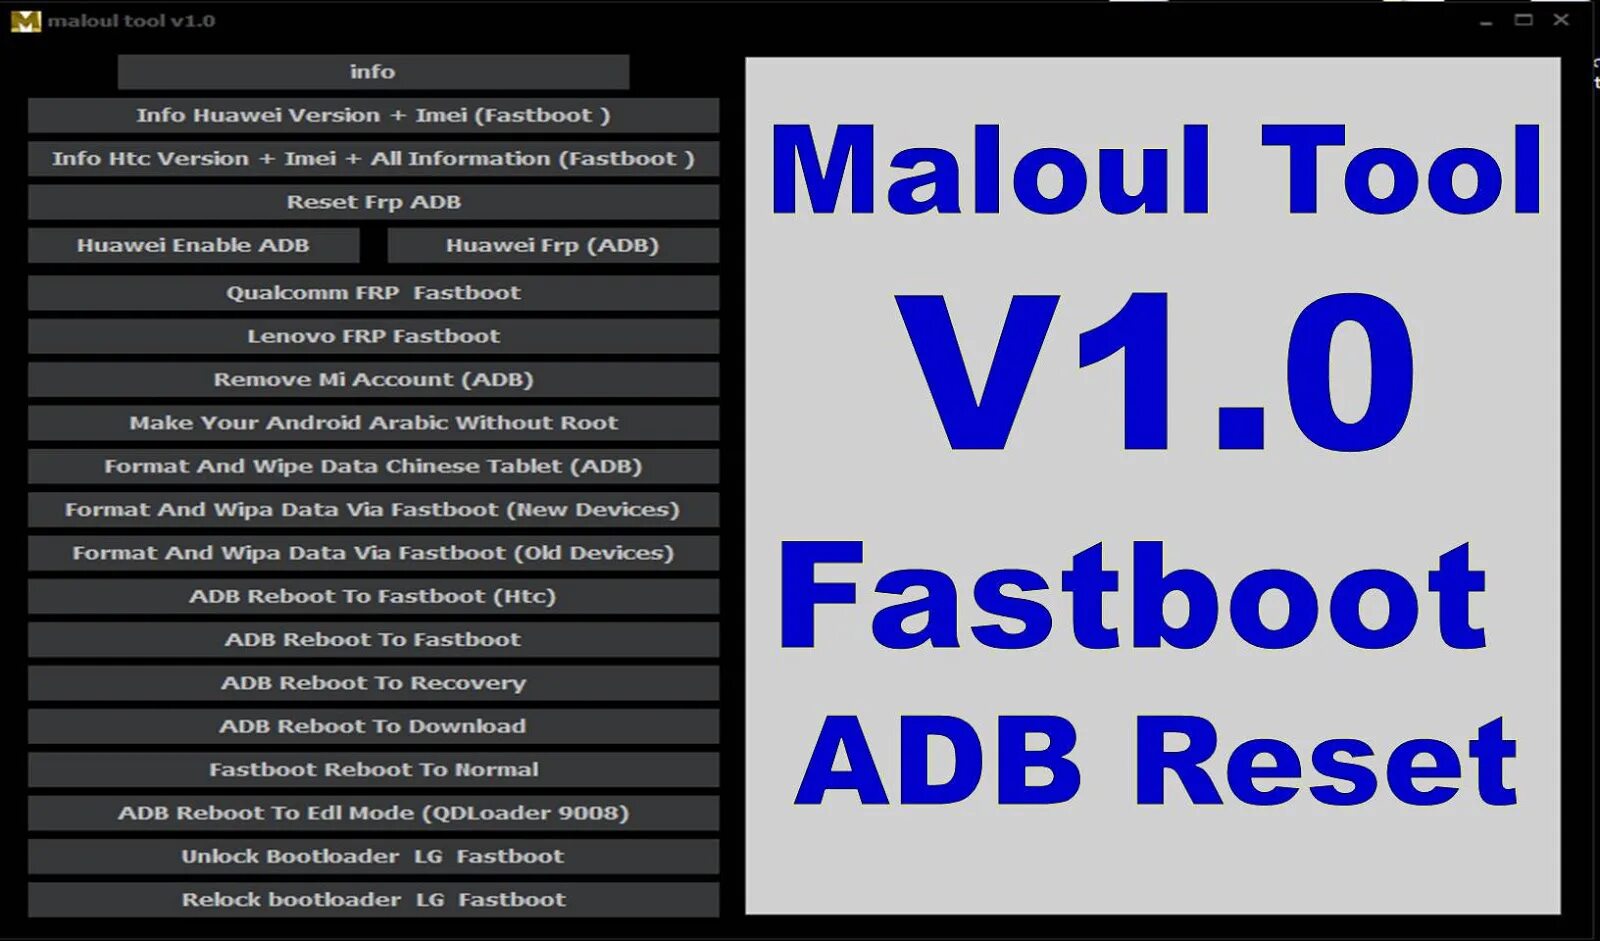 ADB Toolkit. Maloul Tool v1. Android Fastboot reset Tool v1.2. Логотип сброс FRP Android. Miracle xiaomi tool